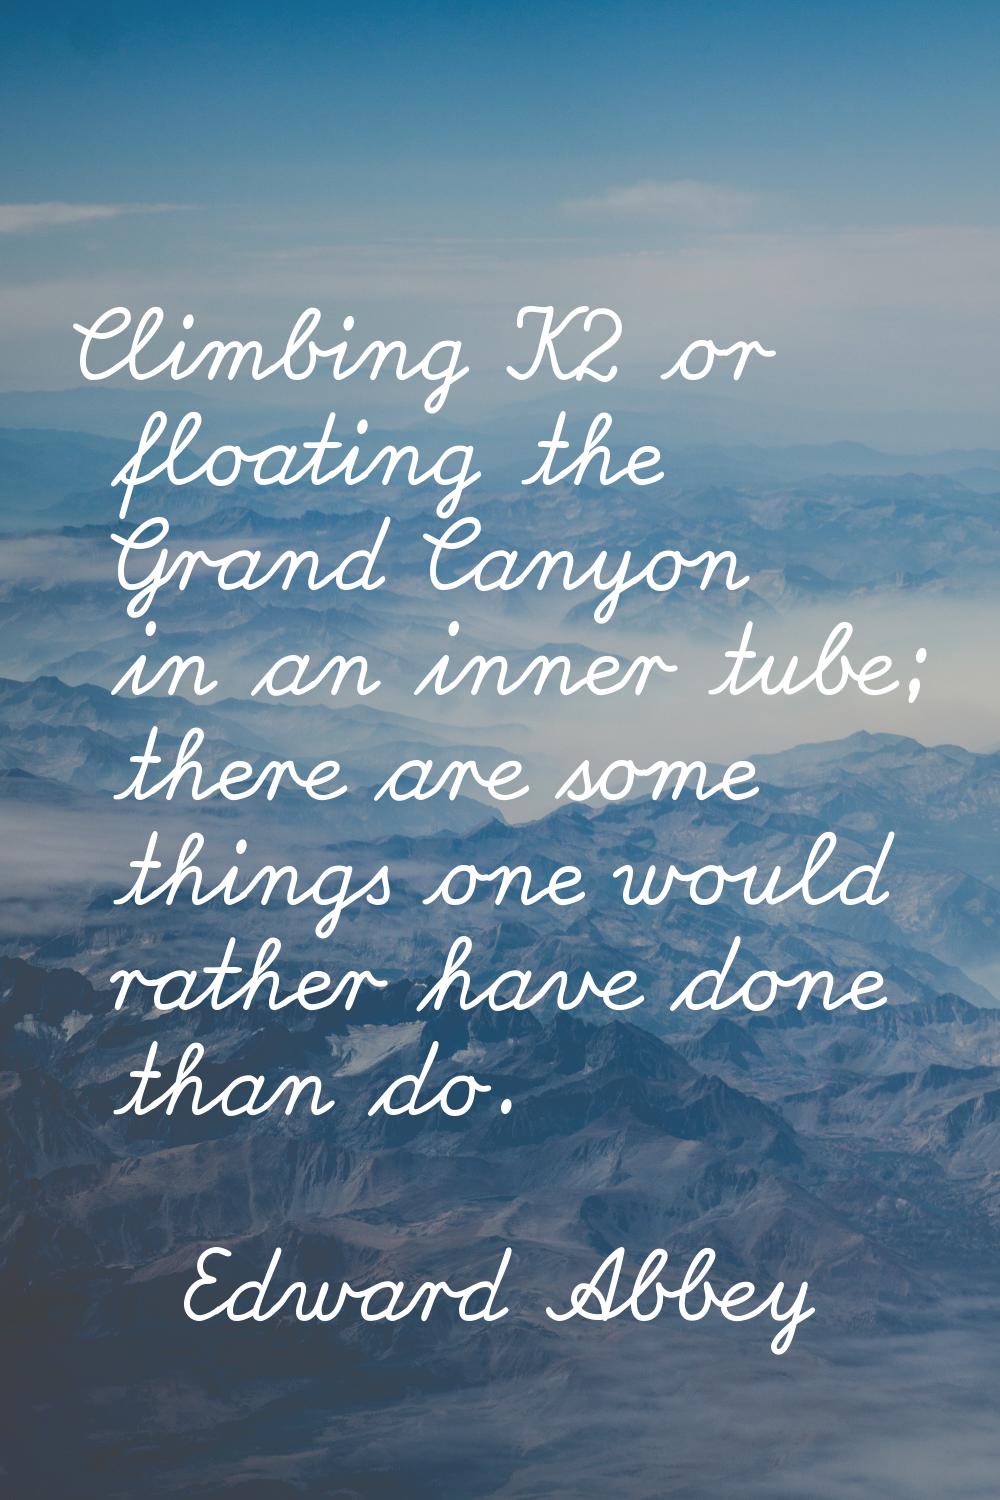 Climbing K2 or floating the Grand Canyon in an inner tube; there are some things one would rather h